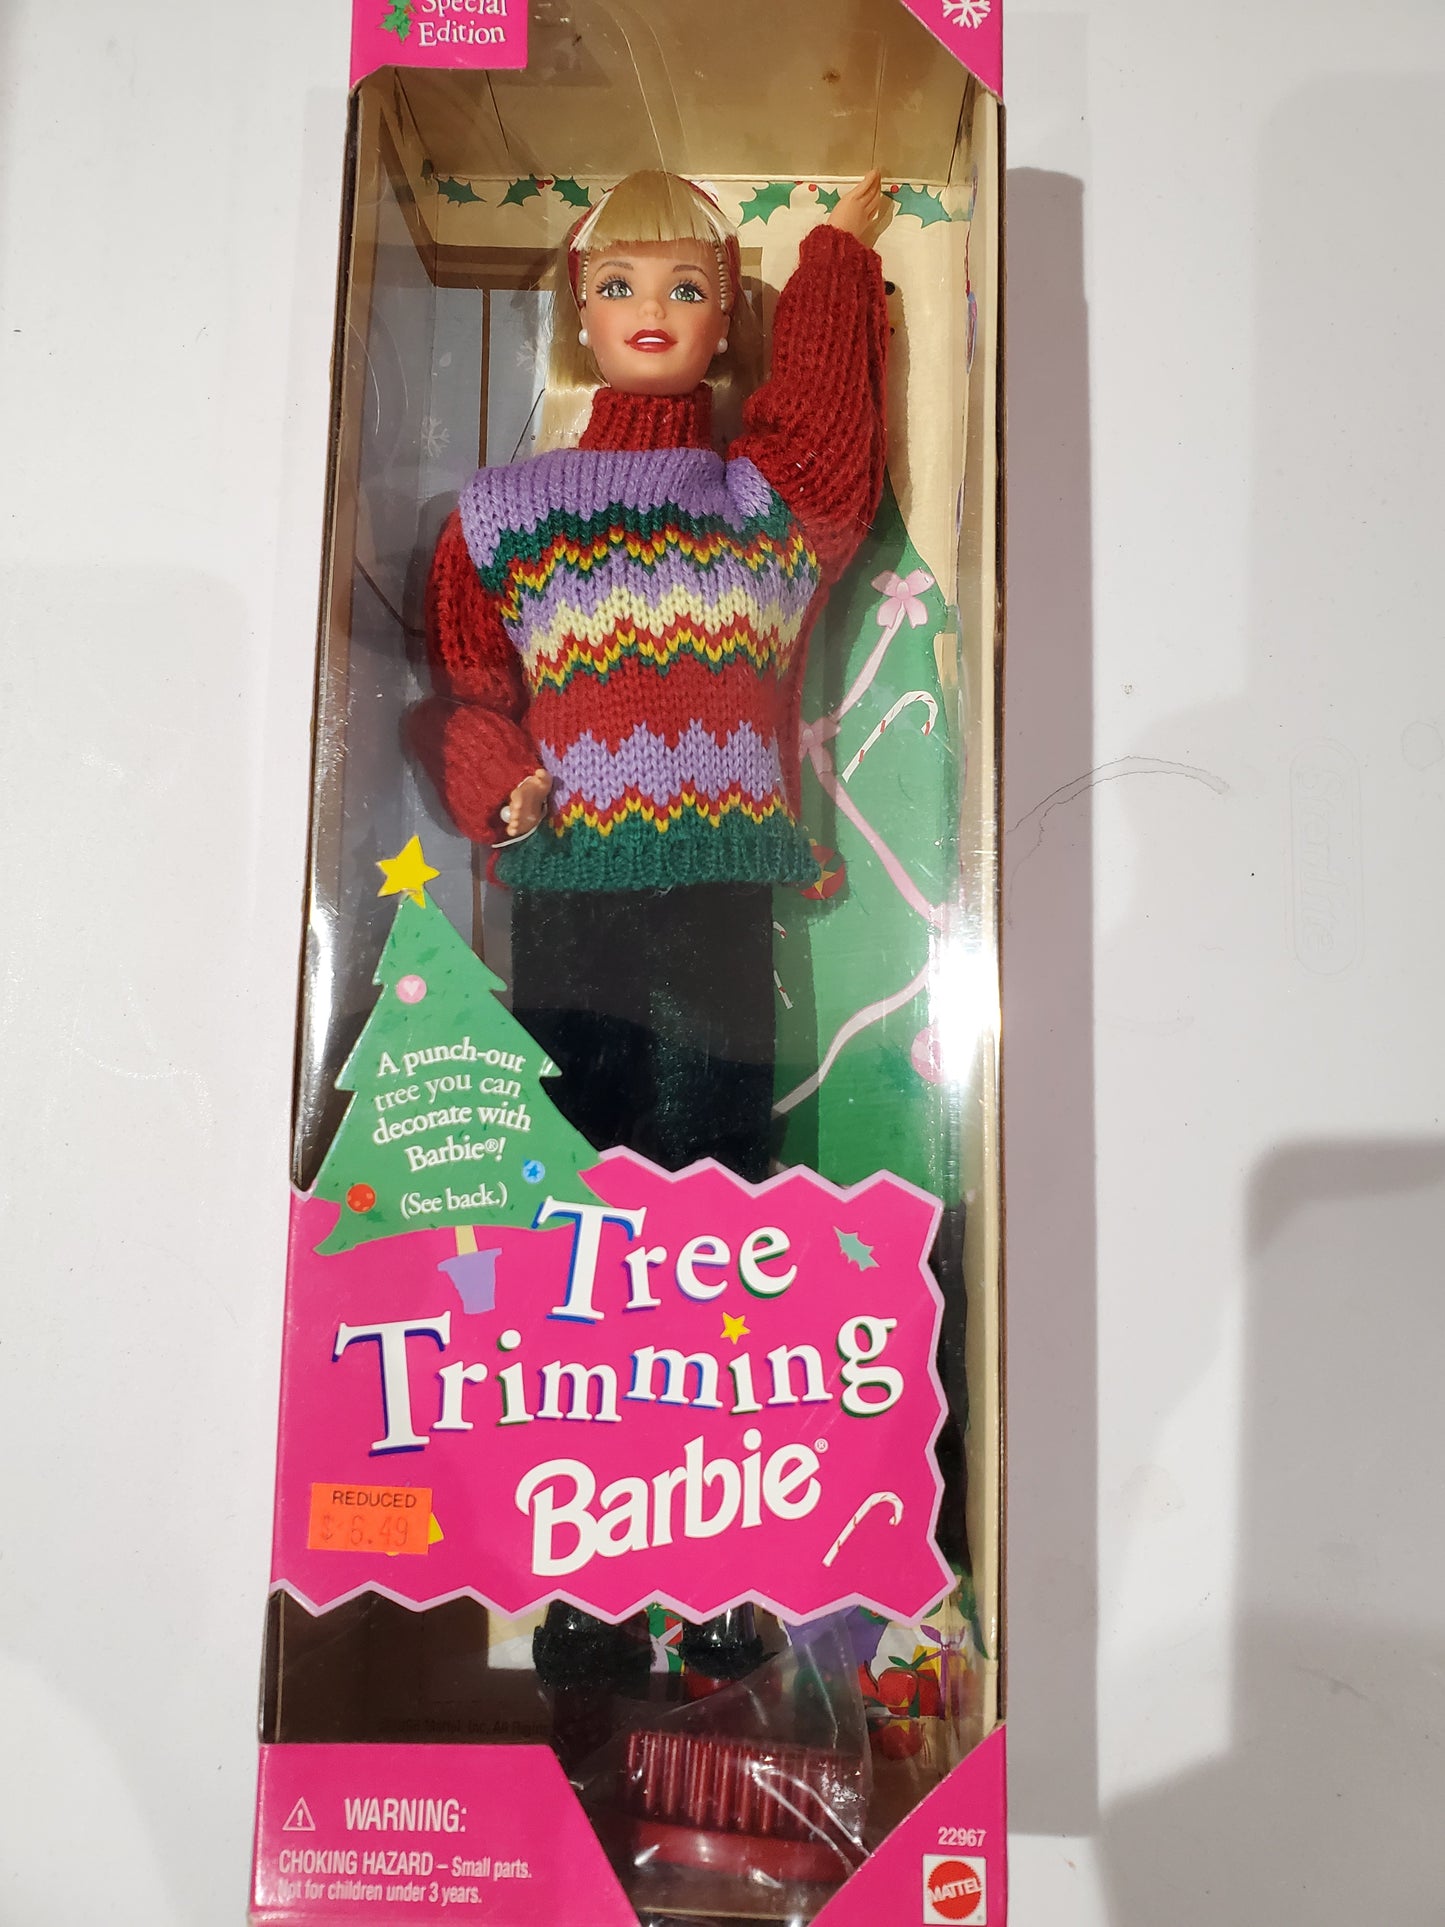 Tree Trimming Barbie Christmas Doll Mint in Box - 1994